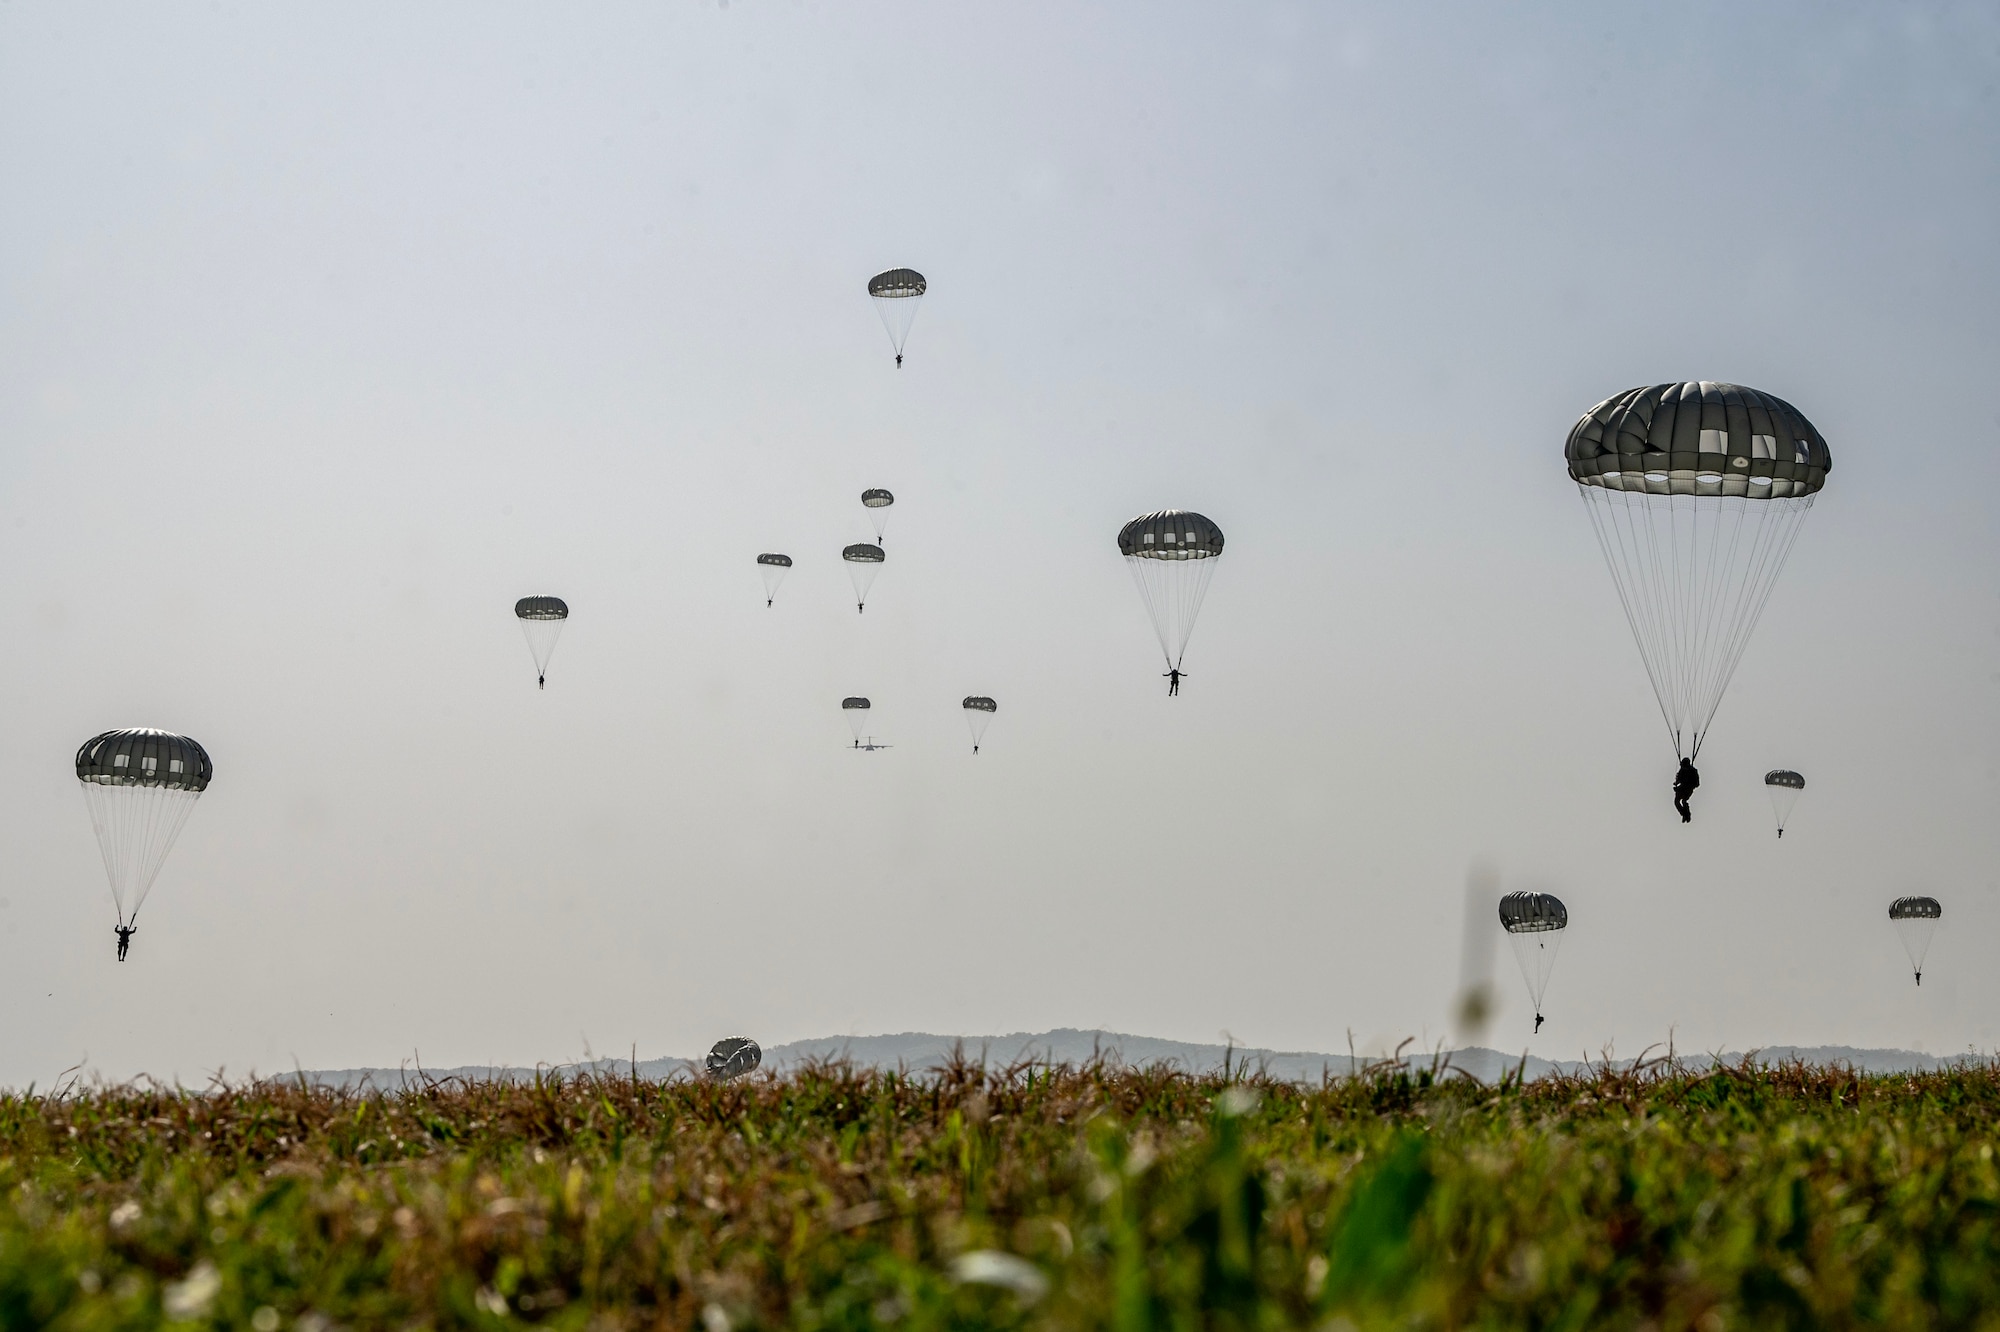 Republic of Korea and U.S. service members participate in airborne jump training during Korea Flight Training 24 at Osan Air Base, ROK, April 18, 2024. KFT 24 is a routine, regularly scheduled annual training that is designed to improve interoperability throughout the Indo-Pacific area of responsibility, while strengthening the U.S.-ROK alliance and their commitments to maintain peace in Northeast Asia. (U.S. Air Force photo by Staff Sgt. Aubree Owens)